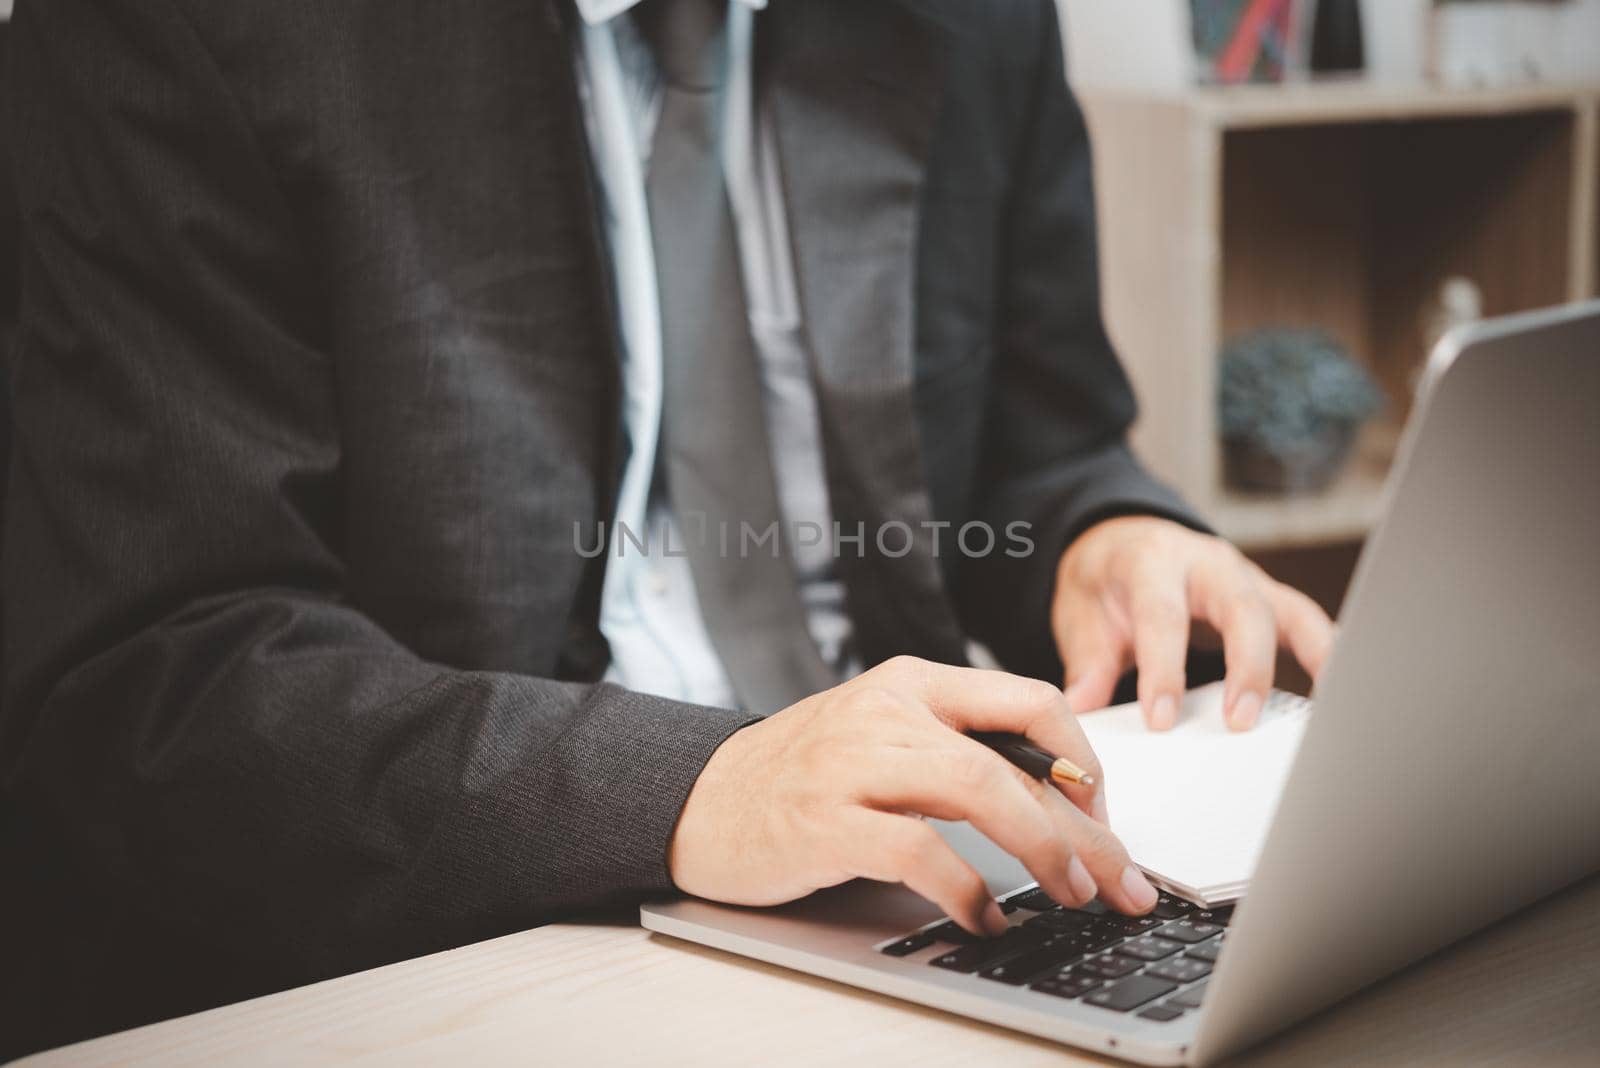 Man person using keyboard computer laptop holding pen and book on desk. by aoo3771